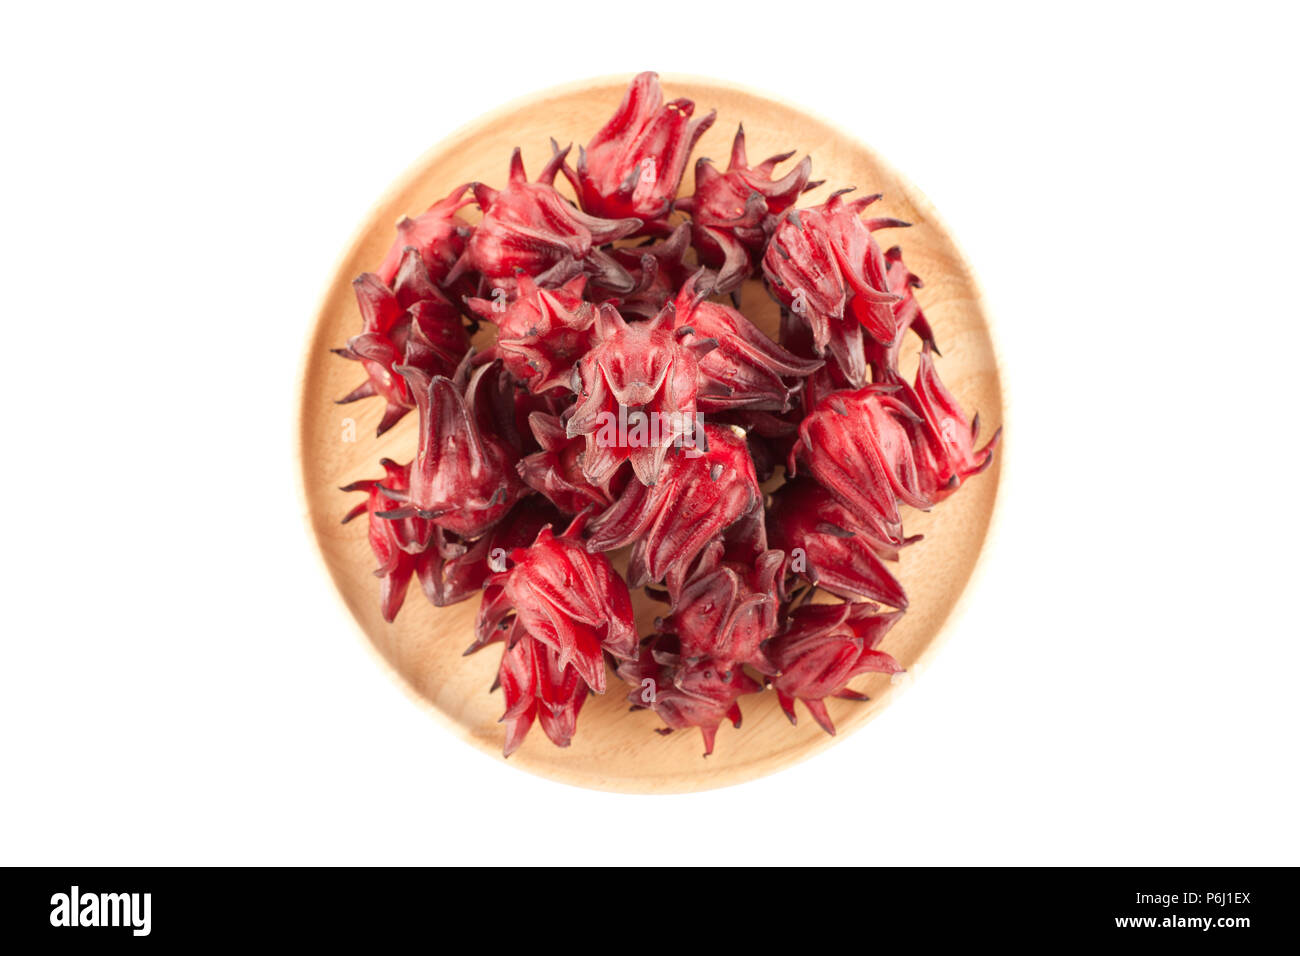 Top view angle of red roselle wooden bowl isolated on white background with clupping path Stock Photo